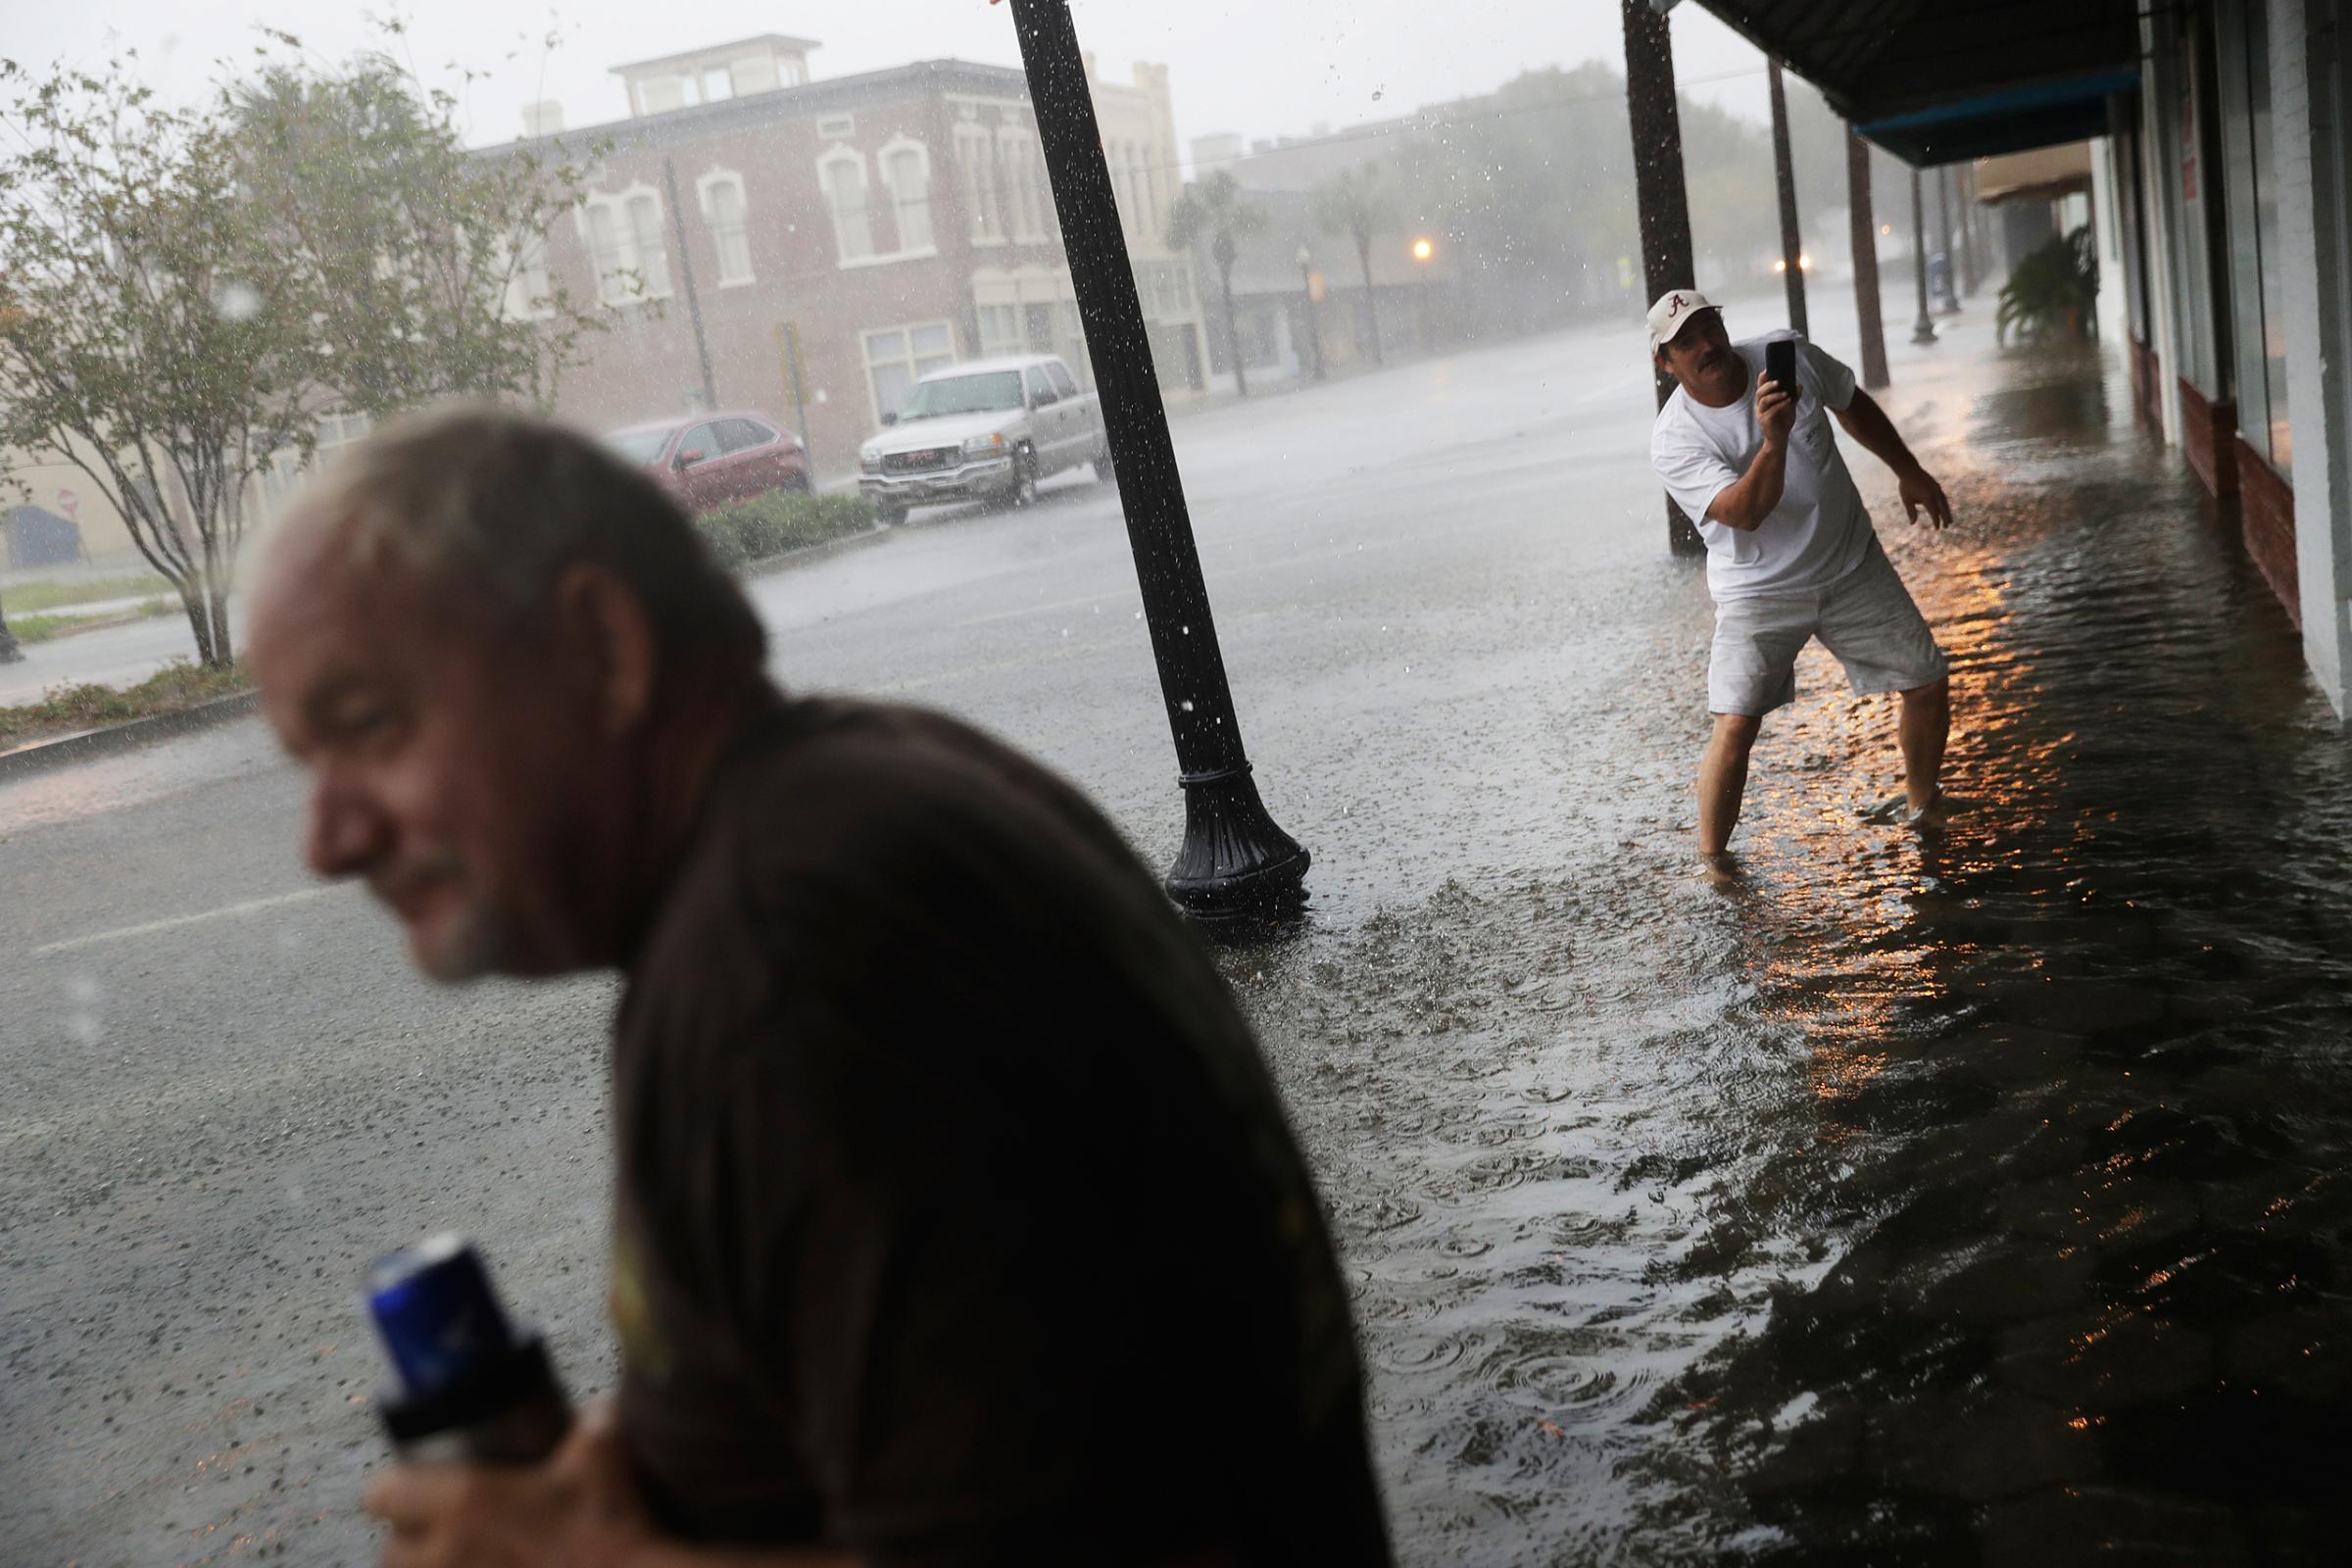 Keith Paseur, right, and Pat Barlow survey a flooded street from Hurricane Matthew as they check on a neighbor riding out the storm in their store in downtown Brunswick, Ga., Friday, Oct. 7, 2016. (AP Photo/David Goldman)